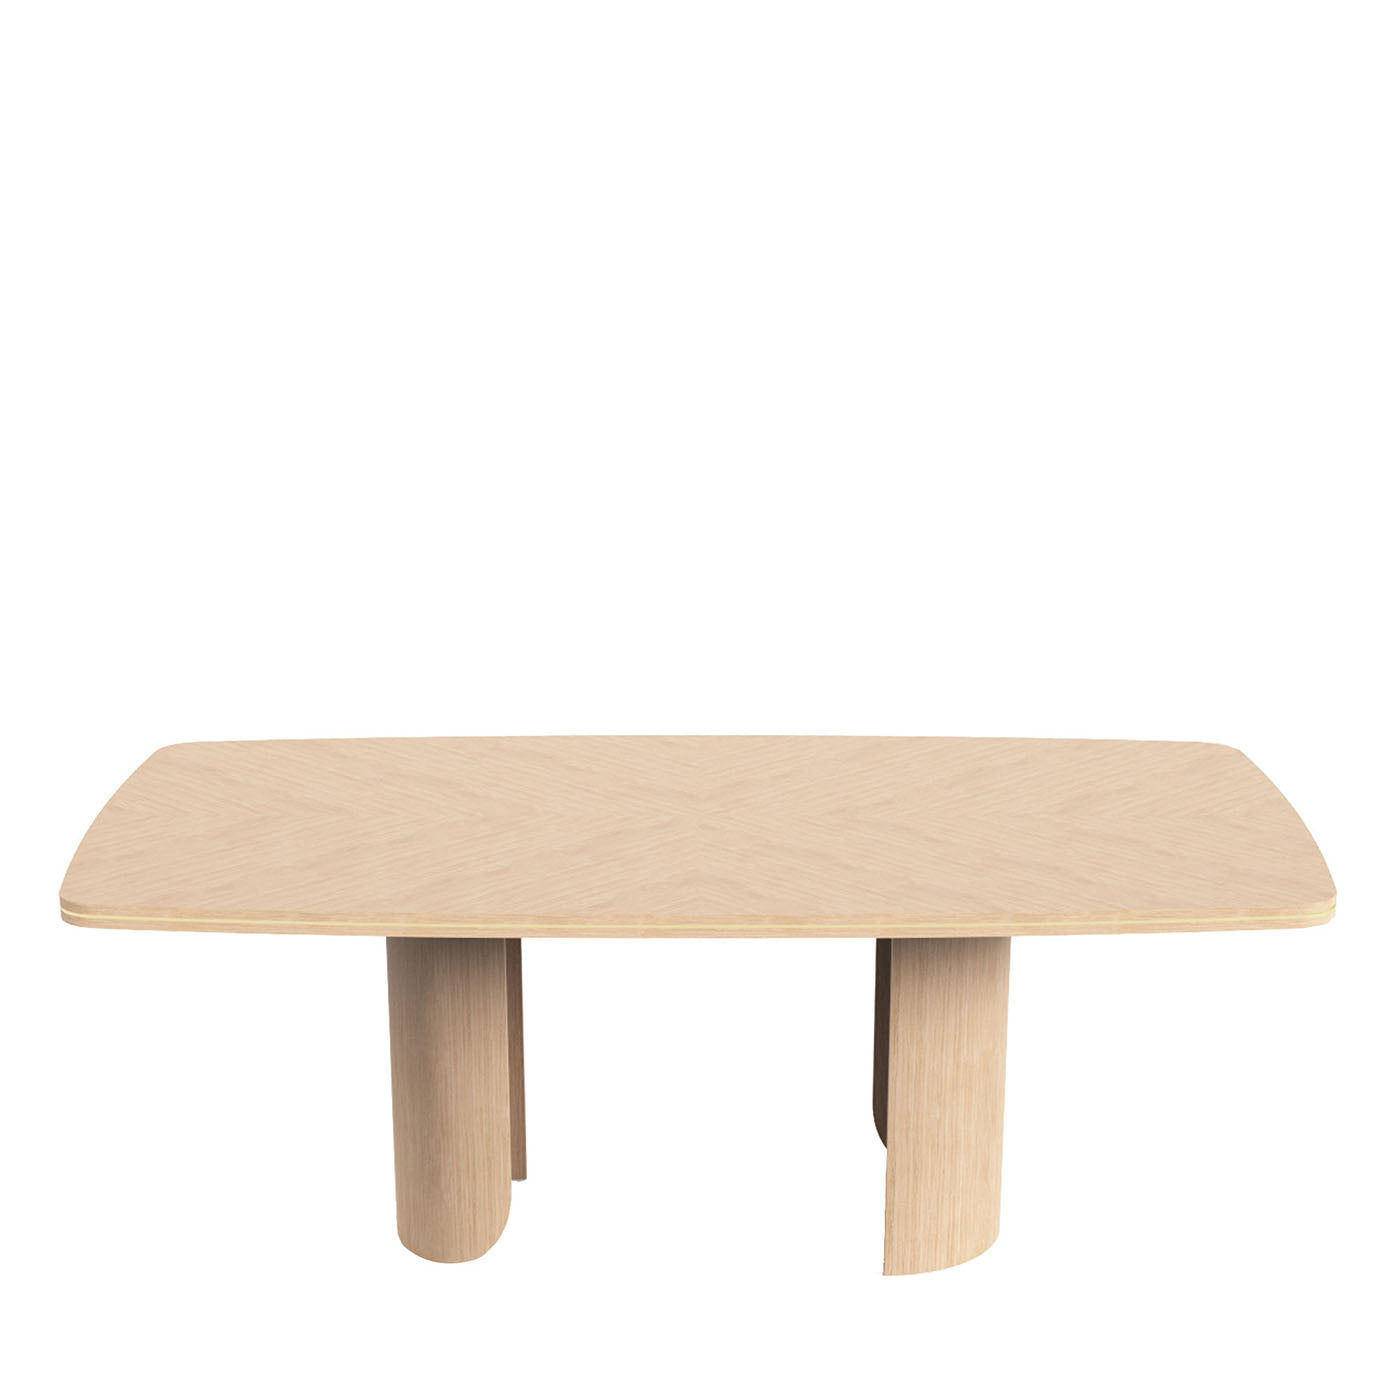 Edo Extendable Beige Dining Table - Main view